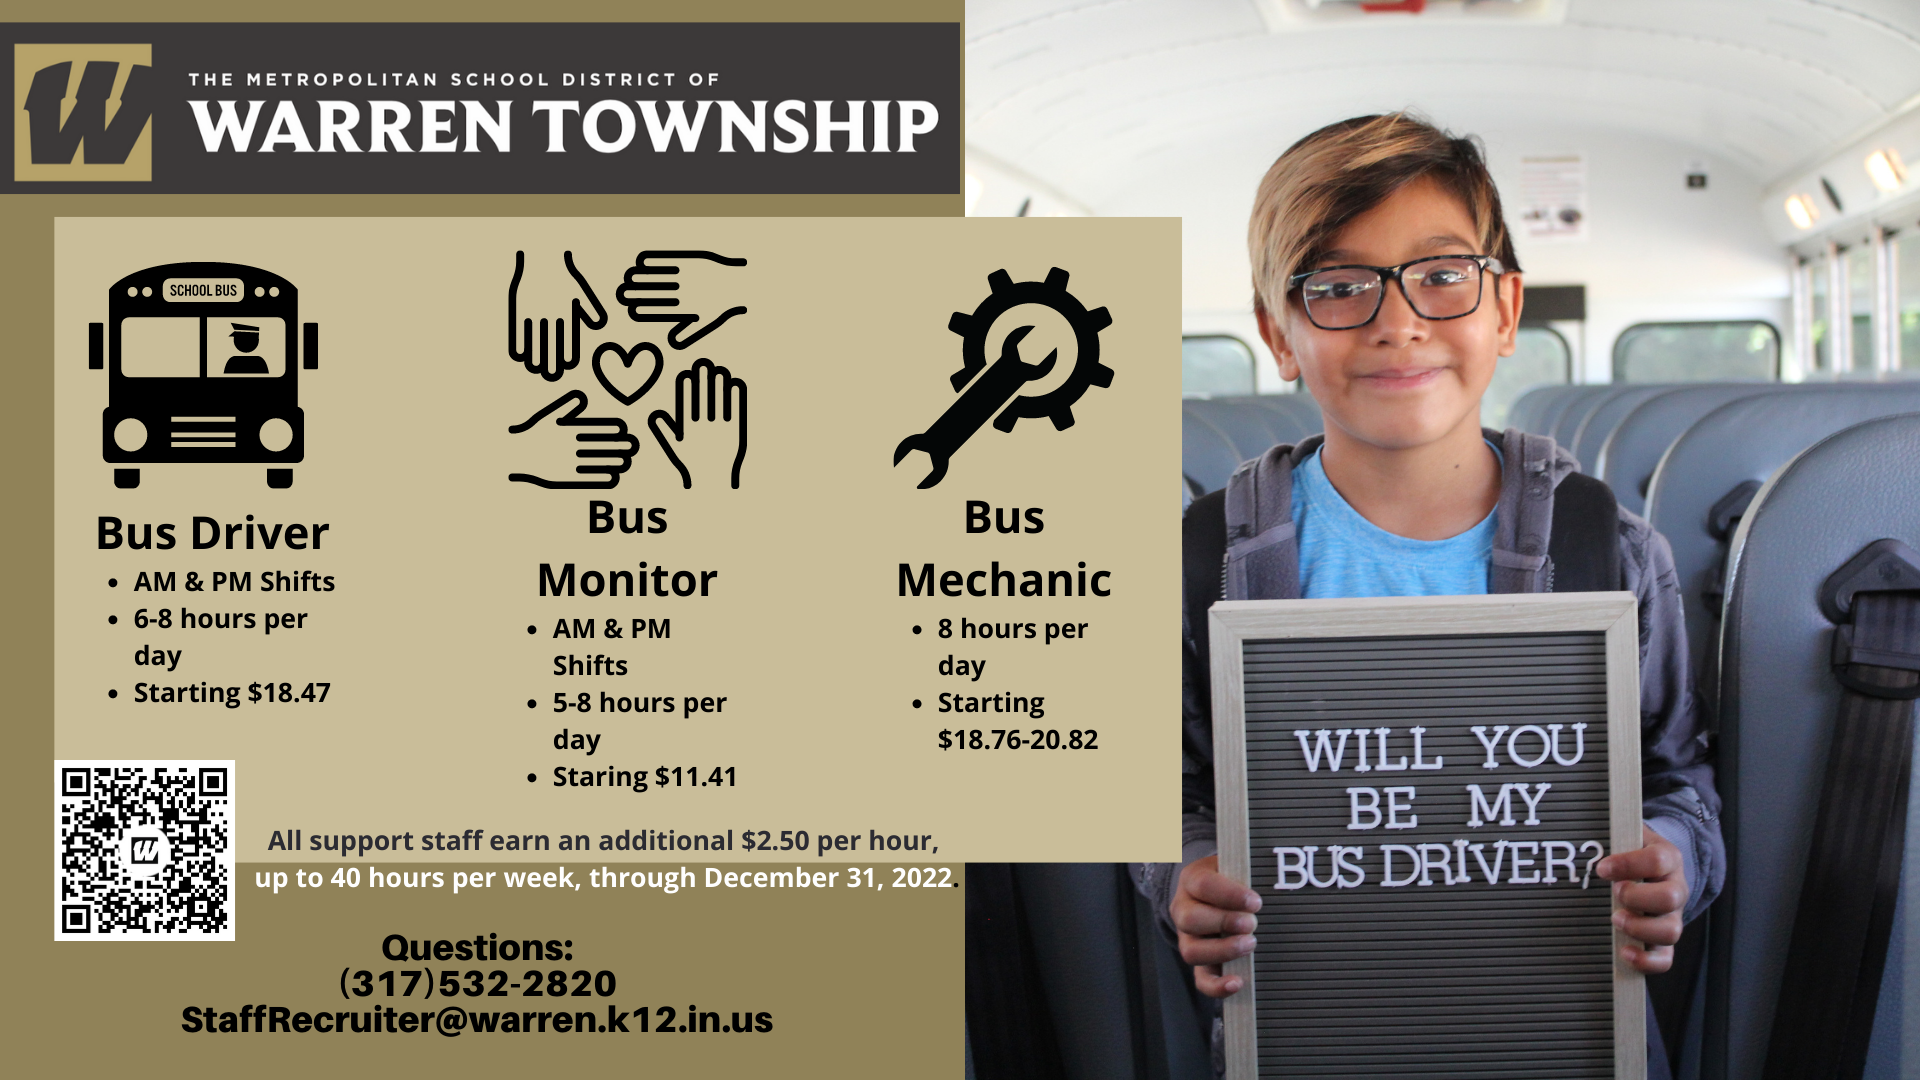 Bus drivers wanted. Call or email  (317)532-2820 or  StaffRecruiter@warren.k12.in.us